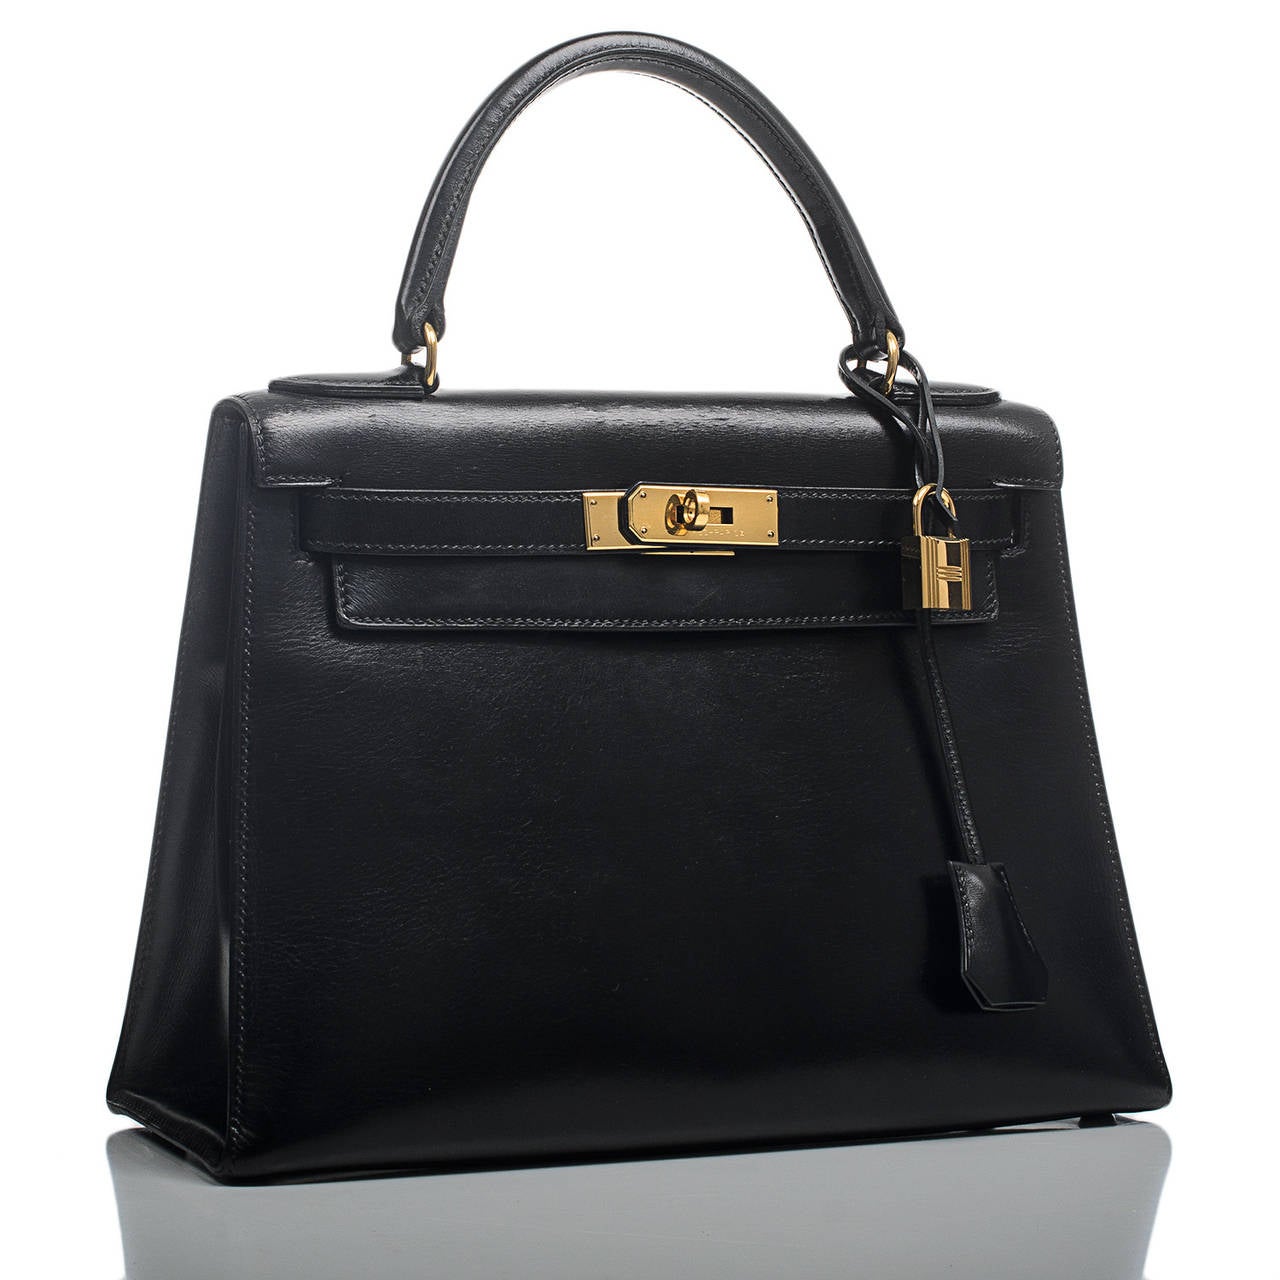 Hermes Kelly Sellier 28cm of black box leather with gold hardware.

The Hermes Kelly bag, like its sister bag -- the Birkin -- is a coveted and scarce bag. Like its muse, Grace Kelly, this bag is the definition of timeless elegance. The original